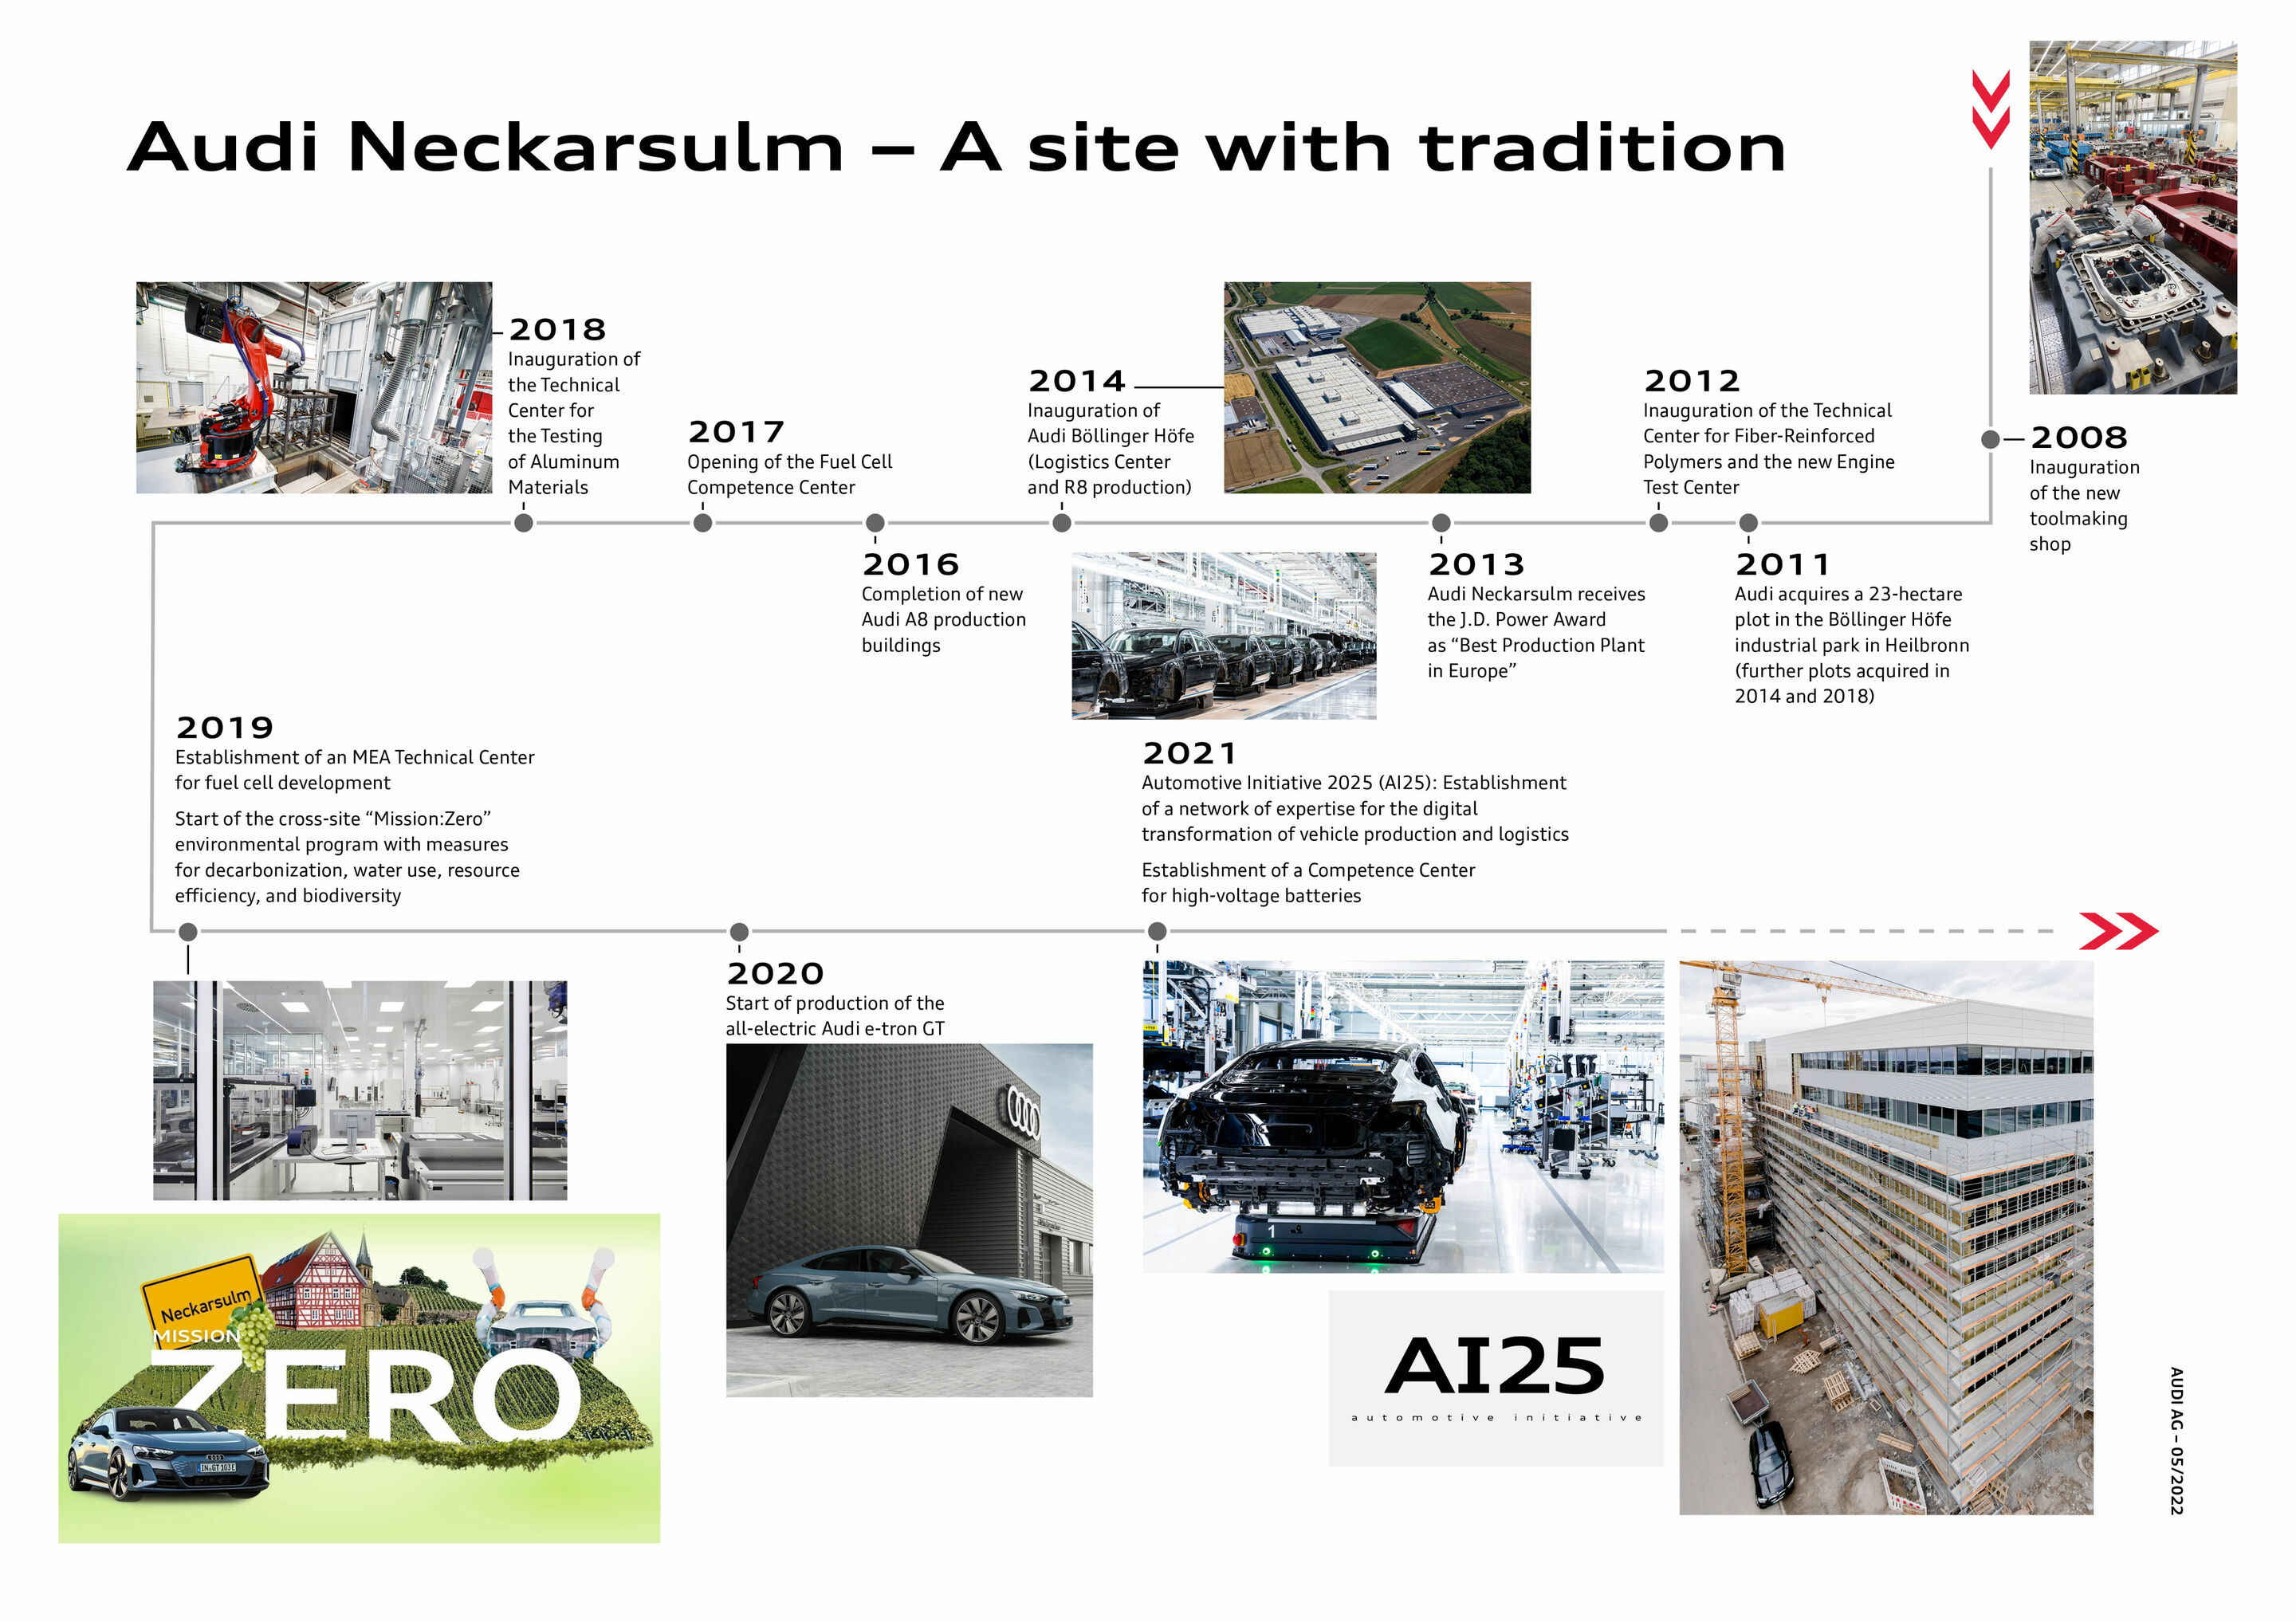 The traditional NSU brand and Audi’s Neckarsulm site: 150 years of innovation and transformation